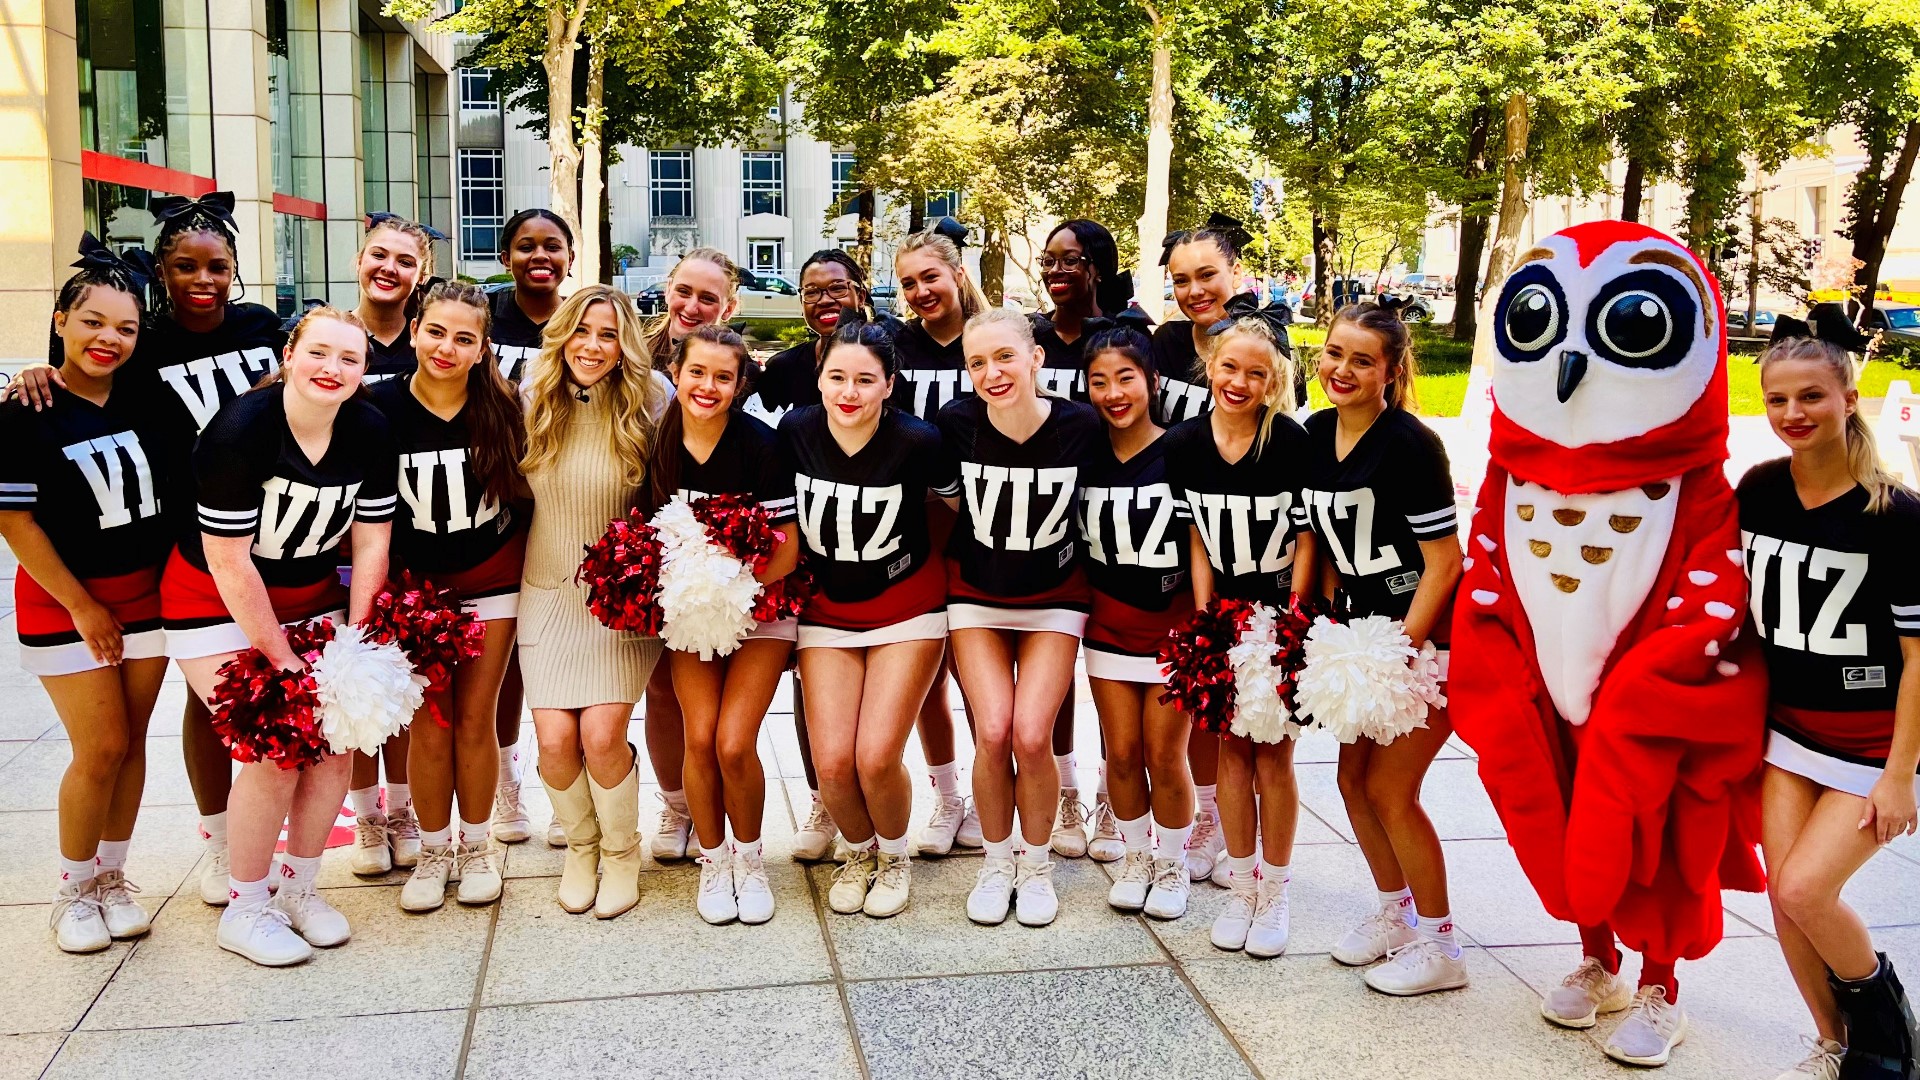 The Visitation Academy Cheerleaders join Mary C. for Tailgate Friday on Television Plaza.